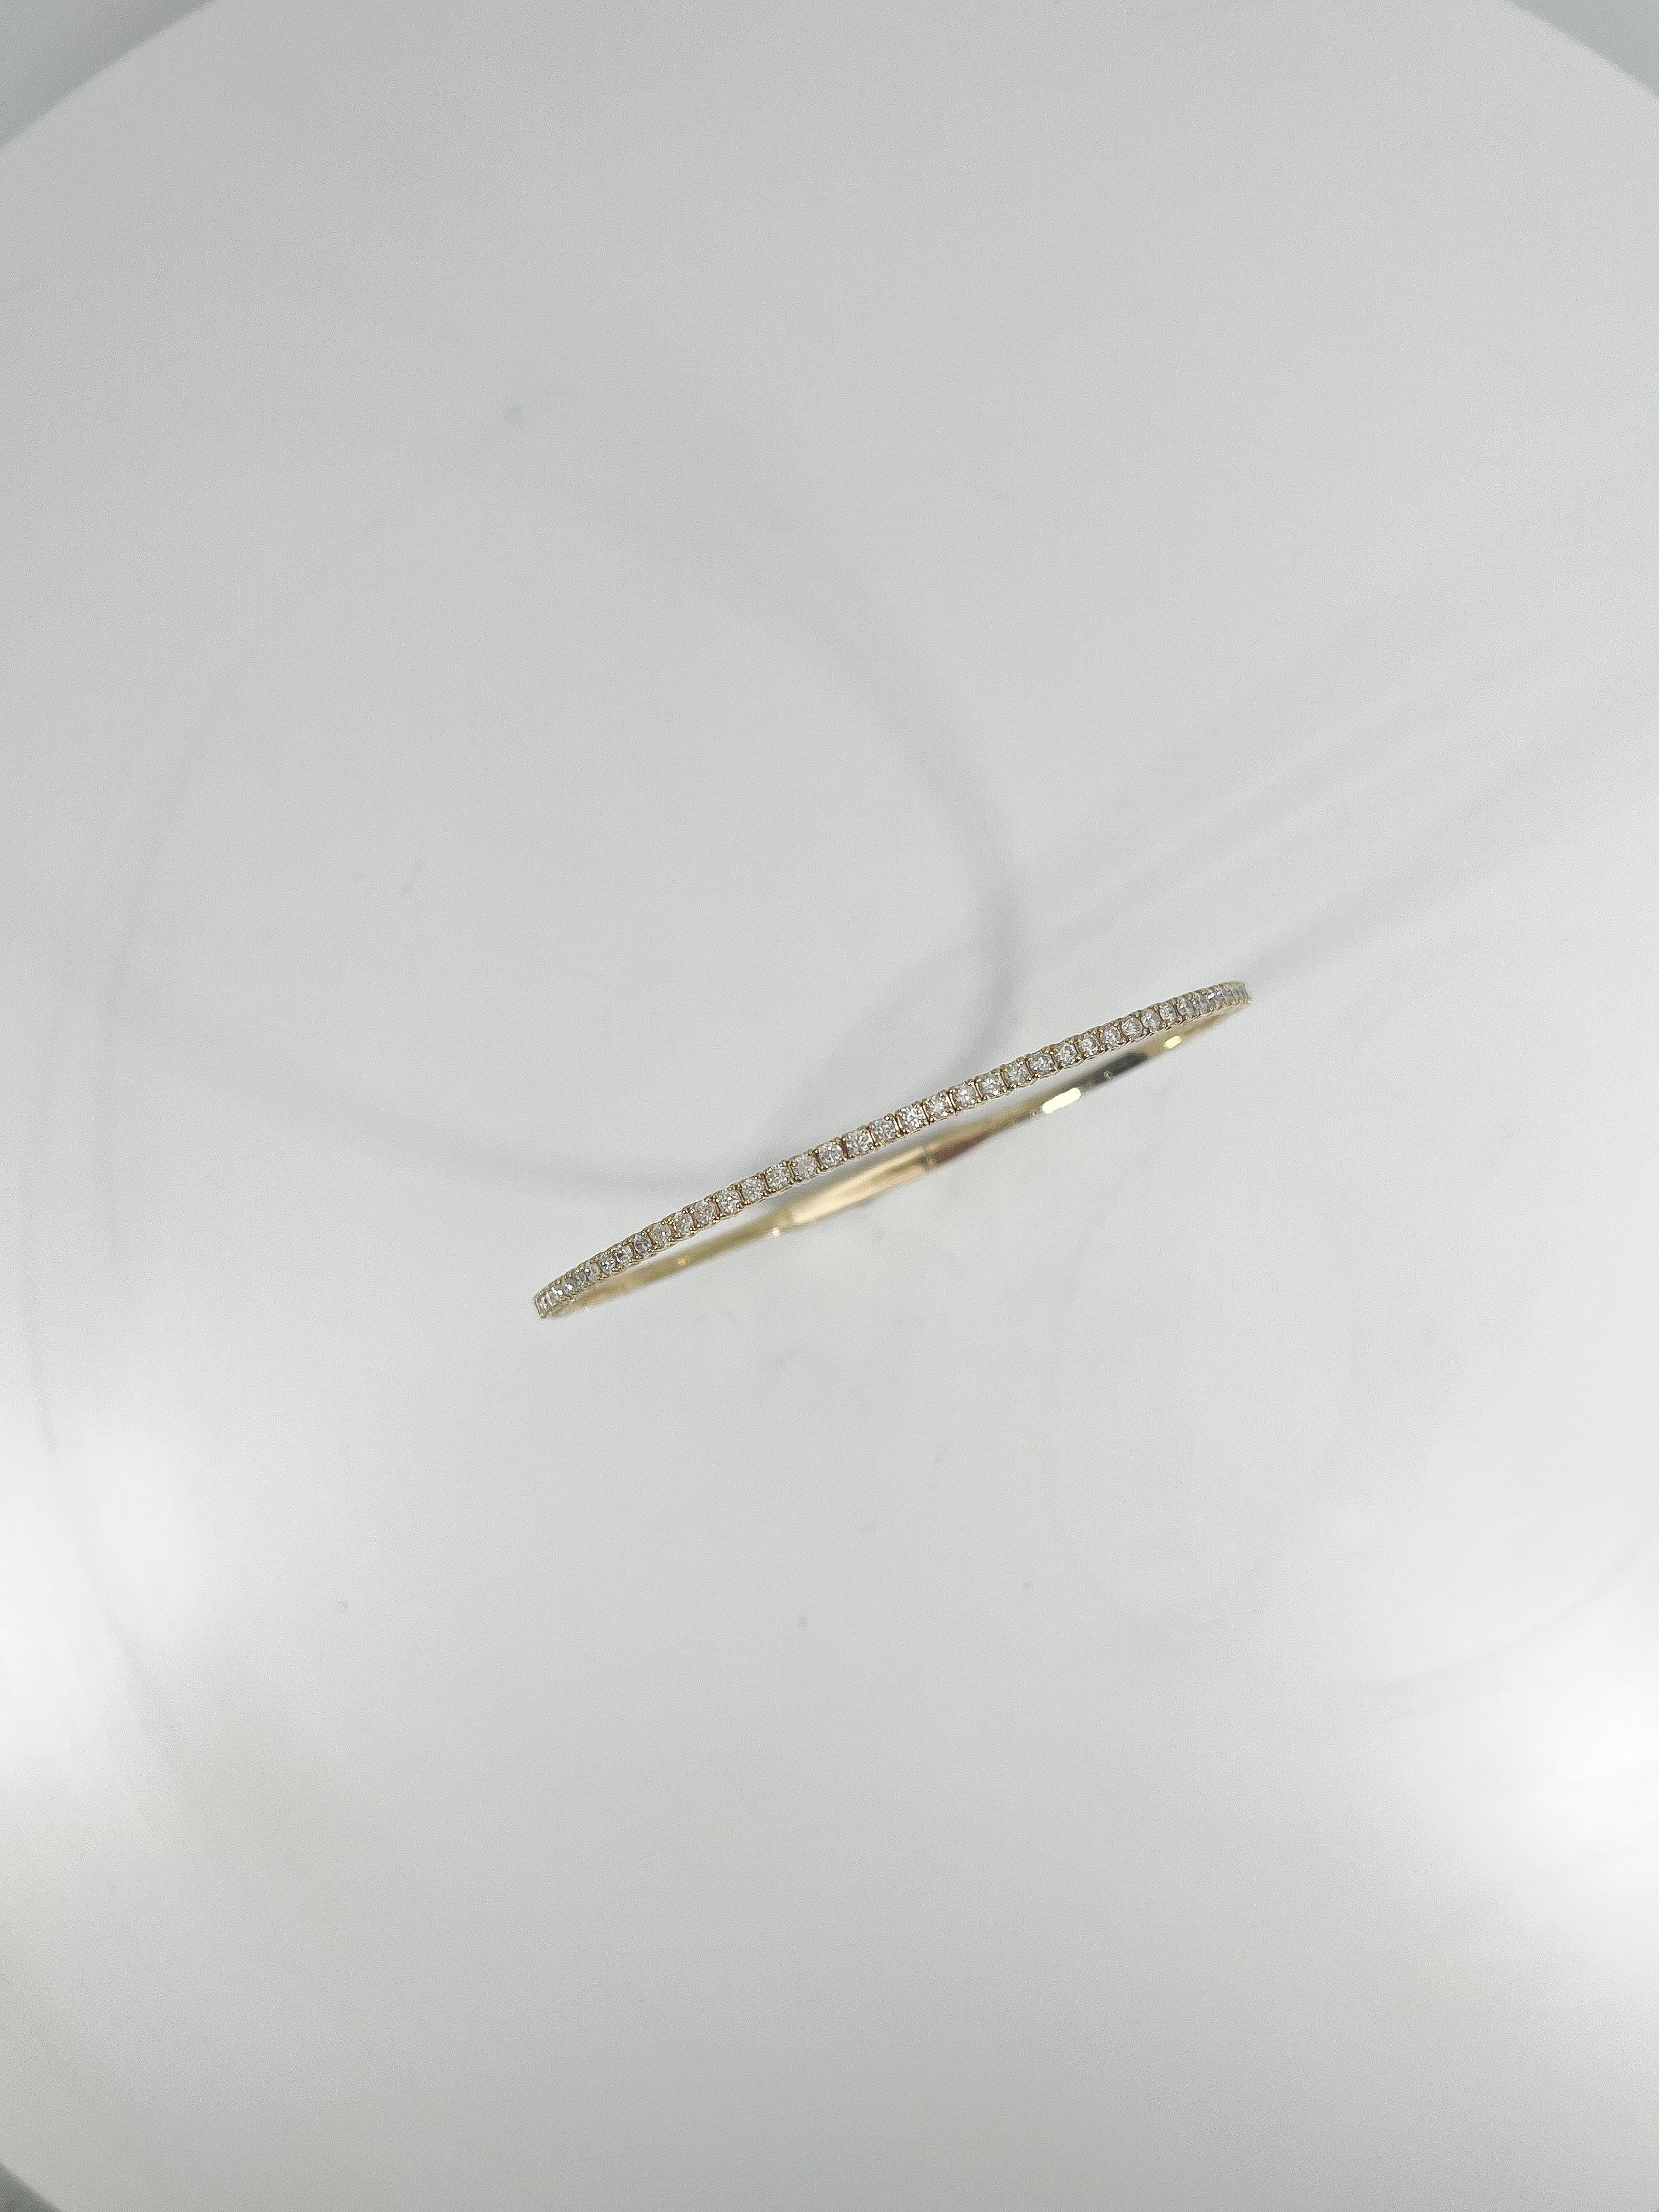 14k yellow gold .85 CTW Diamond Flex Bangle. The diamonds in this bracelet are all round, the width measures 2 mm, the inside diameter is about 4 inches, and it has a weight of 5.94 grams.